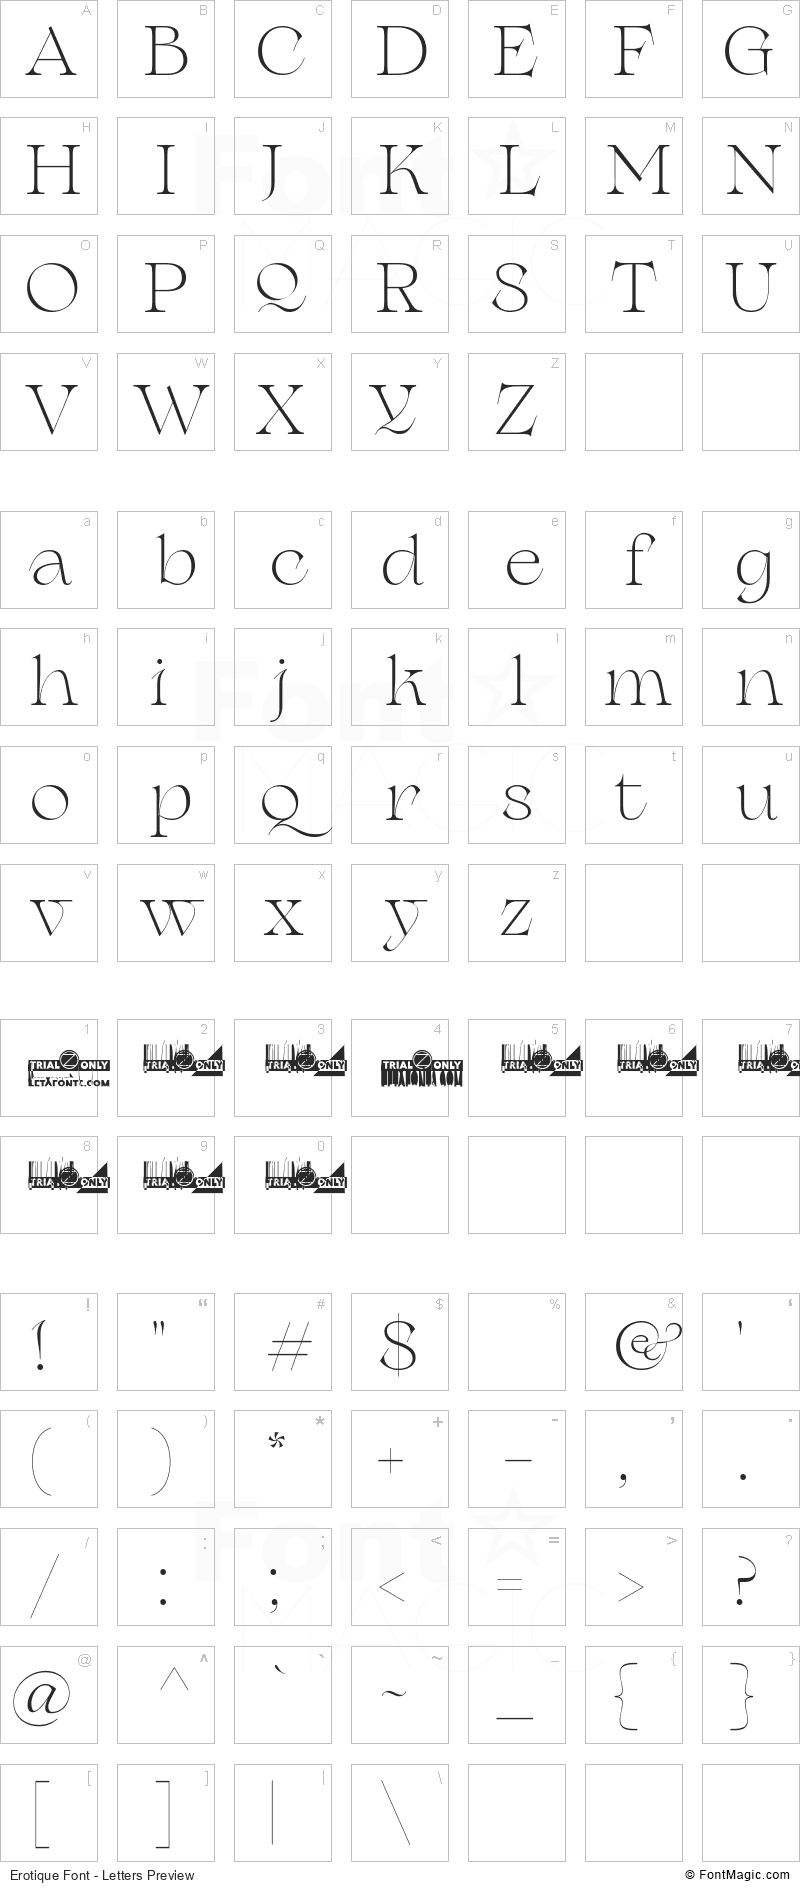 Erotique Font - All Latters Preview Chart